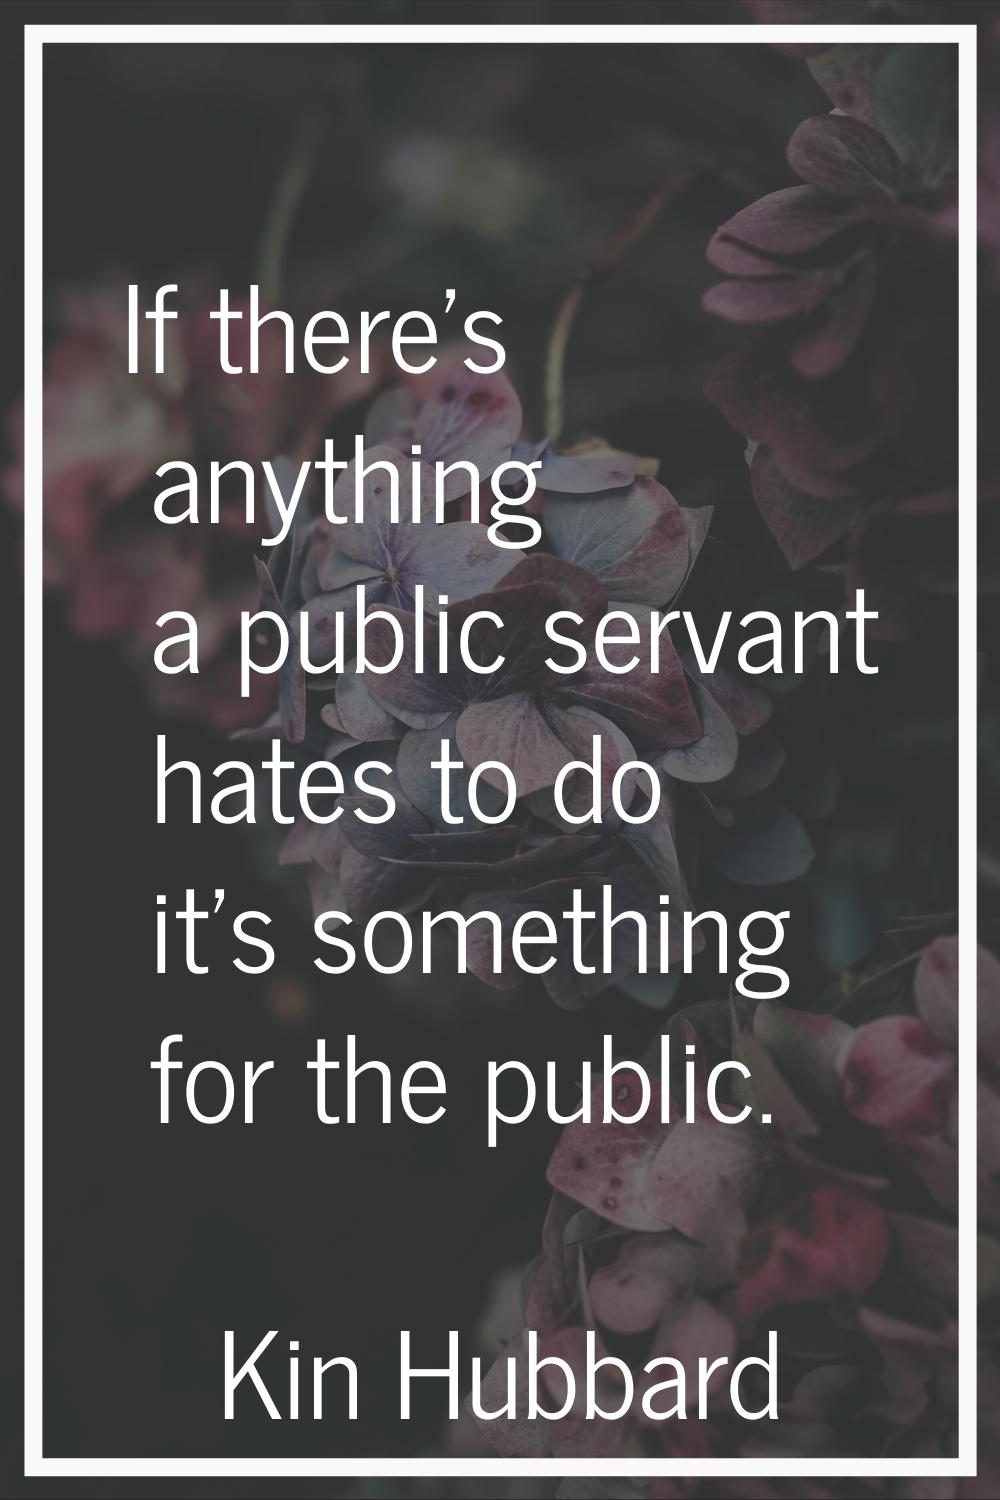 If there's anything a public servant hates to do it's something for the public.